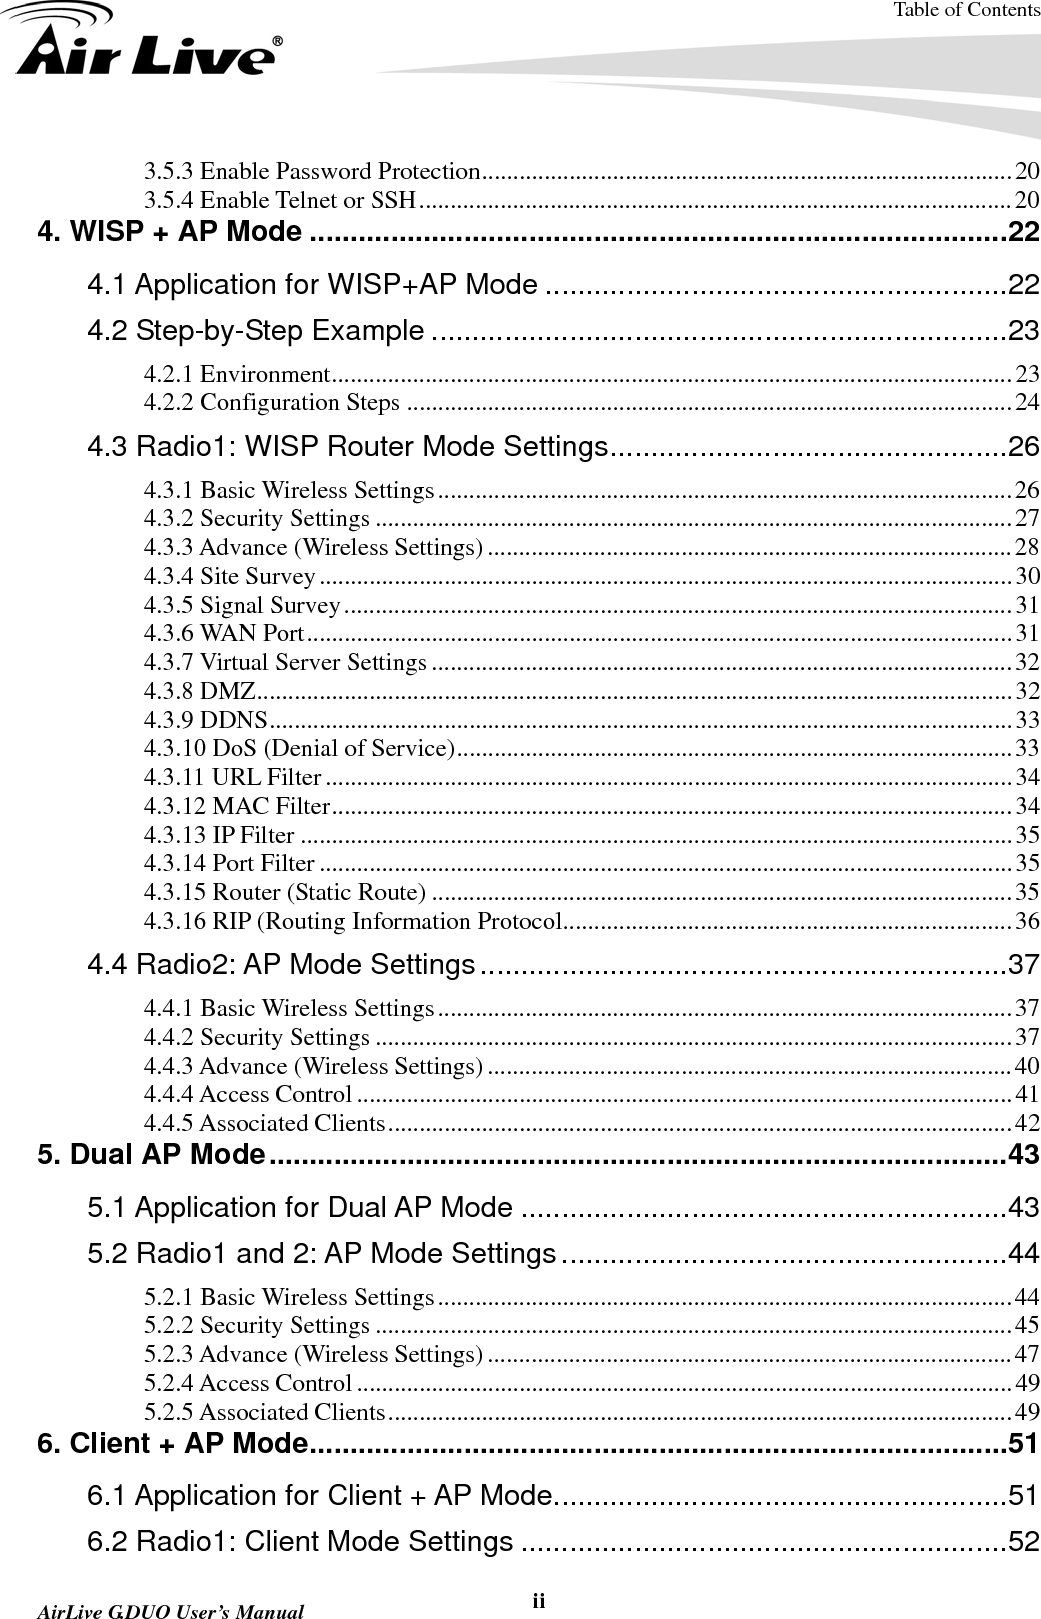 Table of Contents  AirLive G.DUO User’s Manual  ii3.5.3 Enable Password Protection ..................................................................................... 20 3.5.4 Enable Telnet or SSH ............................................................................................... 20 4. WISP + AP Mode ...................................................................................... 22 4.1 Application for WISP+AP Mode ......................................................... 22 4.2 Step-by-Step Example ....................................................................... 23 4.2.1 Environment ............................................................................................................. 23 4.2.2 Configuration Steps ................................................................................................. 24 4.3 Radio1: WISP Router Mode Settings ................................................. 26 4.3.1 Basic Wireless Settings ............................................................................................ 26 4.3.2 Security Settings ...................................................................................................... 27 4.3.3 Advance (Wireless Settings) .................................................................................... 28 4.3.4 Site Survey ............................................................................................................... 30 4.3.5 Signal Survey ........................................................................................................... 31 4.3.6 WAN Port ................................................................................................................. 31 4.3.7 Virtual Server Settings ............................................................................................. 32 4.3.8 DMZ ......................................................................................................................... 32 4.3.9 DDNS ....................................................................................................................... 33 4.3.10 DoS (Denial of Service) ......................................................................................... 33 4.3.11 URL Filter .............................................................................................................. 34 4.3.12 MAC Filter ............................................................................................................. 34 4.3.13 IP Filter .................................................................................................................. 35 4.3.14 Port Filter ............................................................................................................... 35 4.3.15 Router (Static Route) ............................................................................................. 35 4.3.16 RIP (Routing Information Protocol ........................................................................ 36 4.4 Radio2: AP Mode Settings ................................................................. 37 4.4.1 Basic Wireless Settings ............................................................................................ 37 4.4.2 Security Settings ...................................................................................................... 37 4.4.3 Advance (Wireless Settings) .................................................................................... 40 4.4.4 Access Control ......................................................................................................... 41 4.4.5 Associated Clients .................................................................................................... 42 5. Dual AP Mode ........................................................................................... 43 5.1 Application for Dual AP Mode ............................................................ 43 5.2 Radio1 and 2: AP Mode Settings ....................................................... 44 5.2.1 Basic Wireless Settings ............................................................................................ 44 5.2.2 Security Settings ...................................................................................................... 45 5.2.3 Advance (Wireless Settings) .................................................................................... 47 5.2.4 Access Control ......................................................................................................... 49 5.2.5 Associated Clients .................................................................................................... 49 6. Client + AP Mode ...................................................................................... 51 6.1 Application for Client + AP Mode........................................................ 51 6.2 Radio1: Client Mode Settings ............................................................ 52 